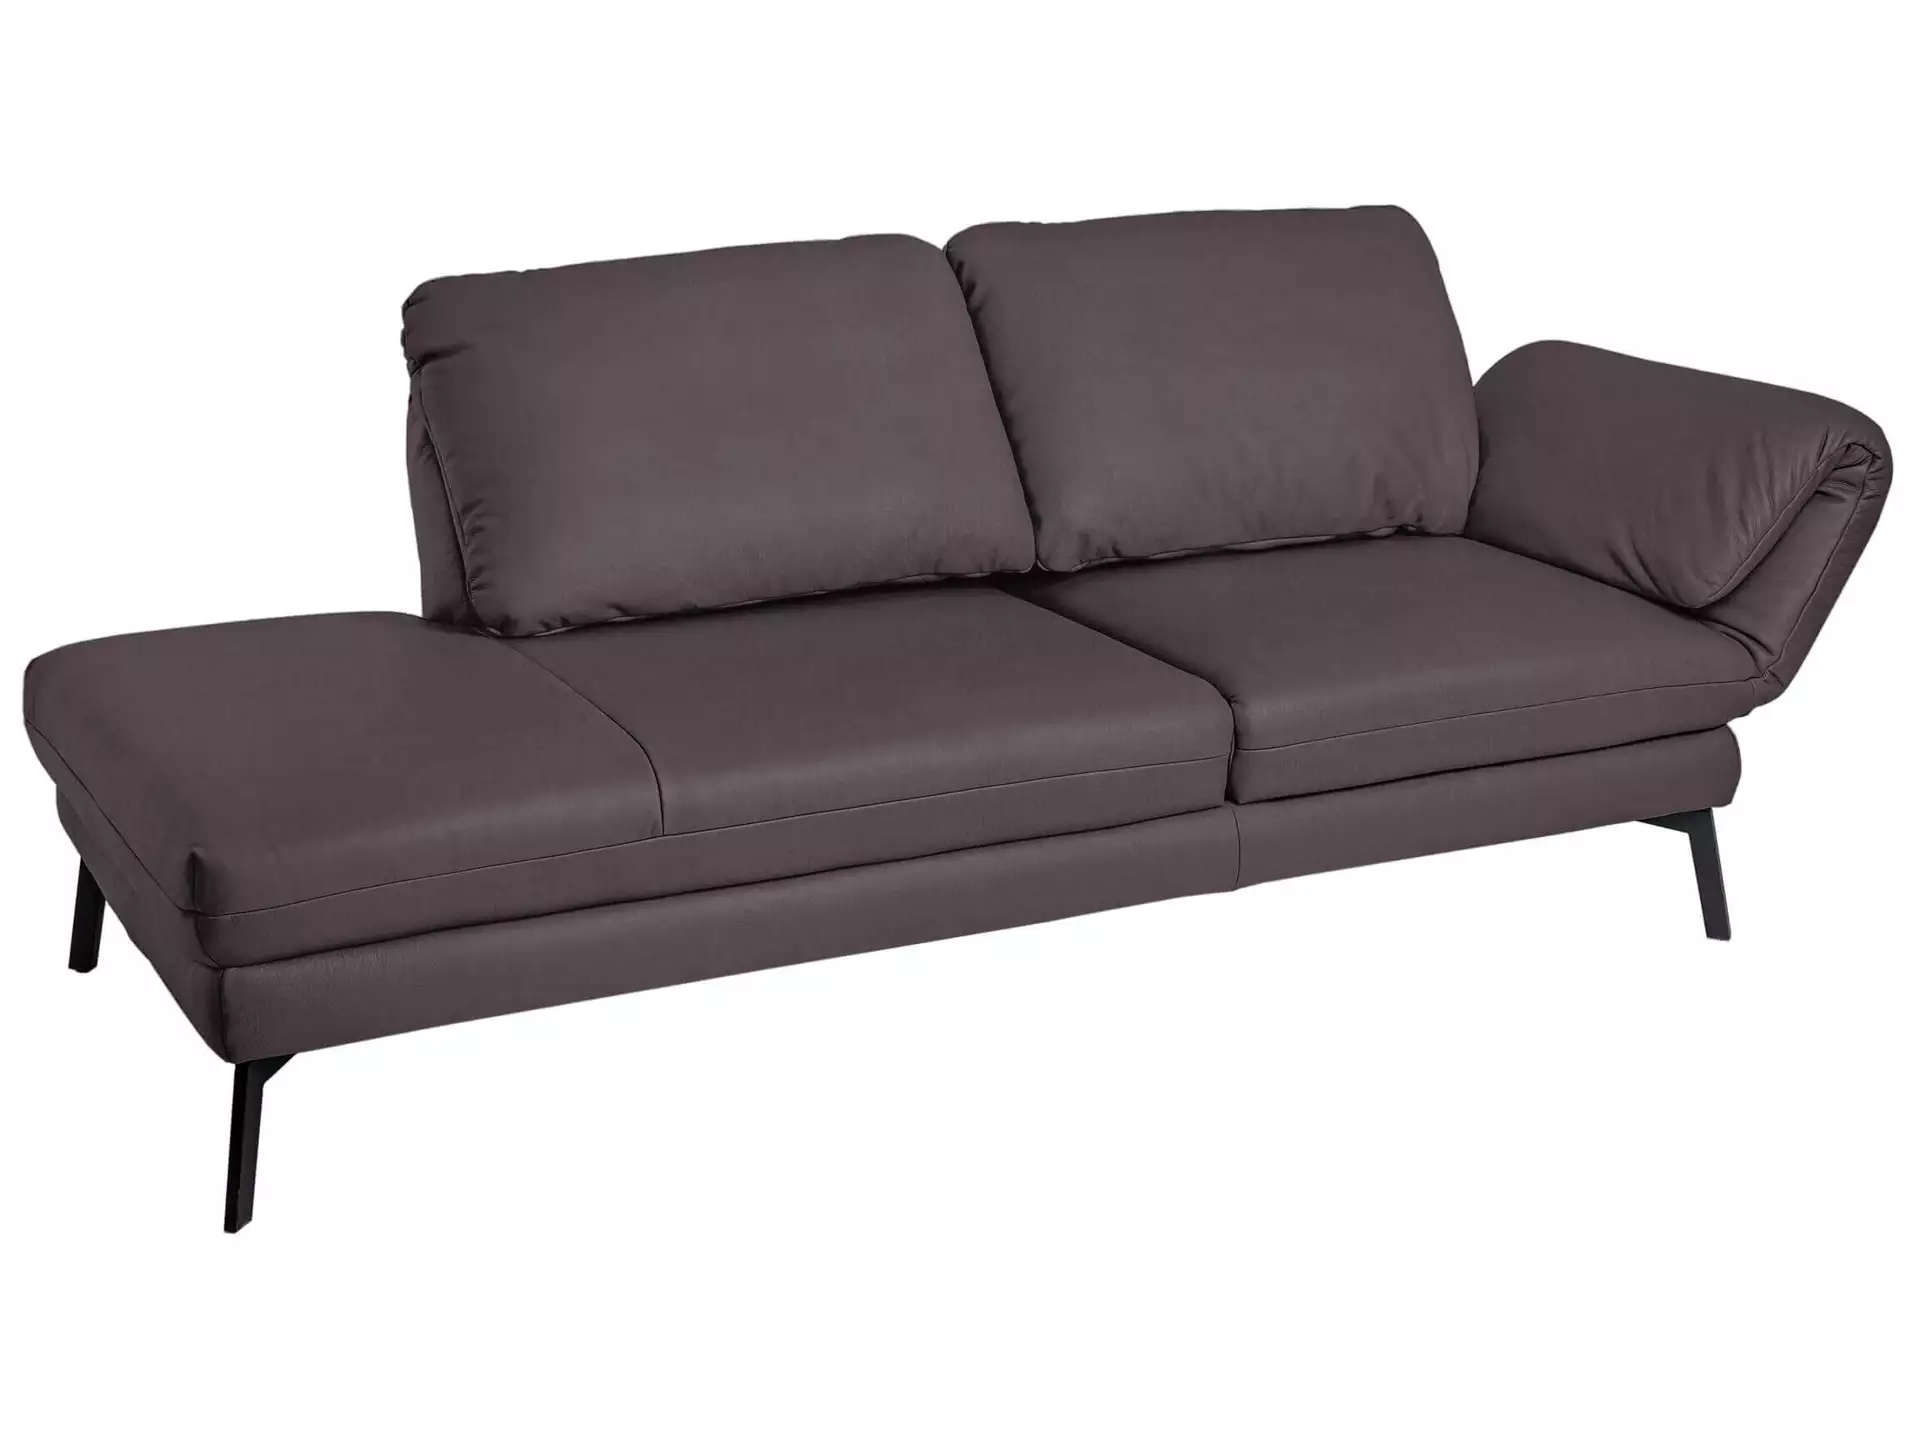 Liegesofa Medusa Basic Candy / Farbe: Steel / Bezugsmaterial: Stoff Basic